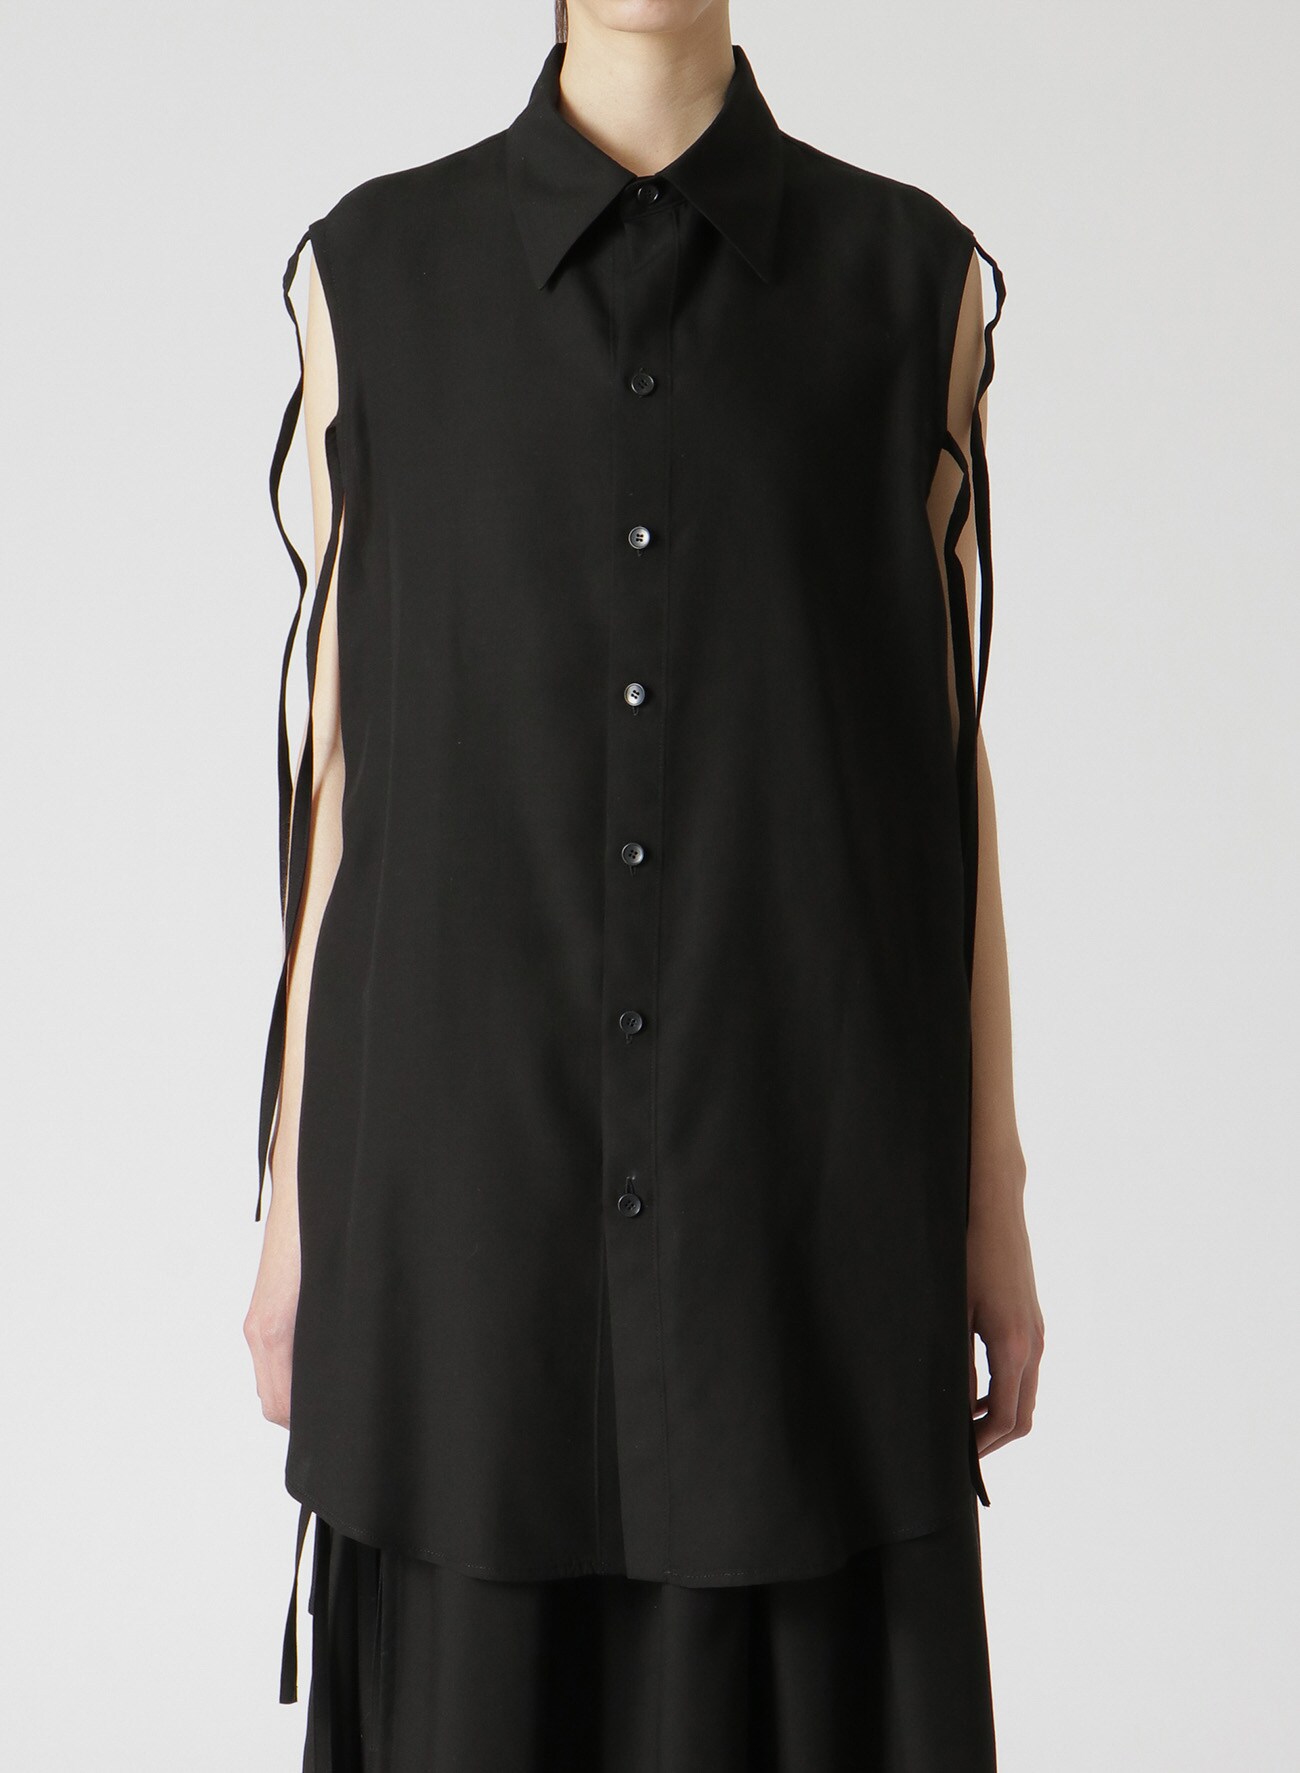 SHIRT WITH SLEEVE SLITS AND RIBBON DETAILS(S Black): LIMI feu｜THE